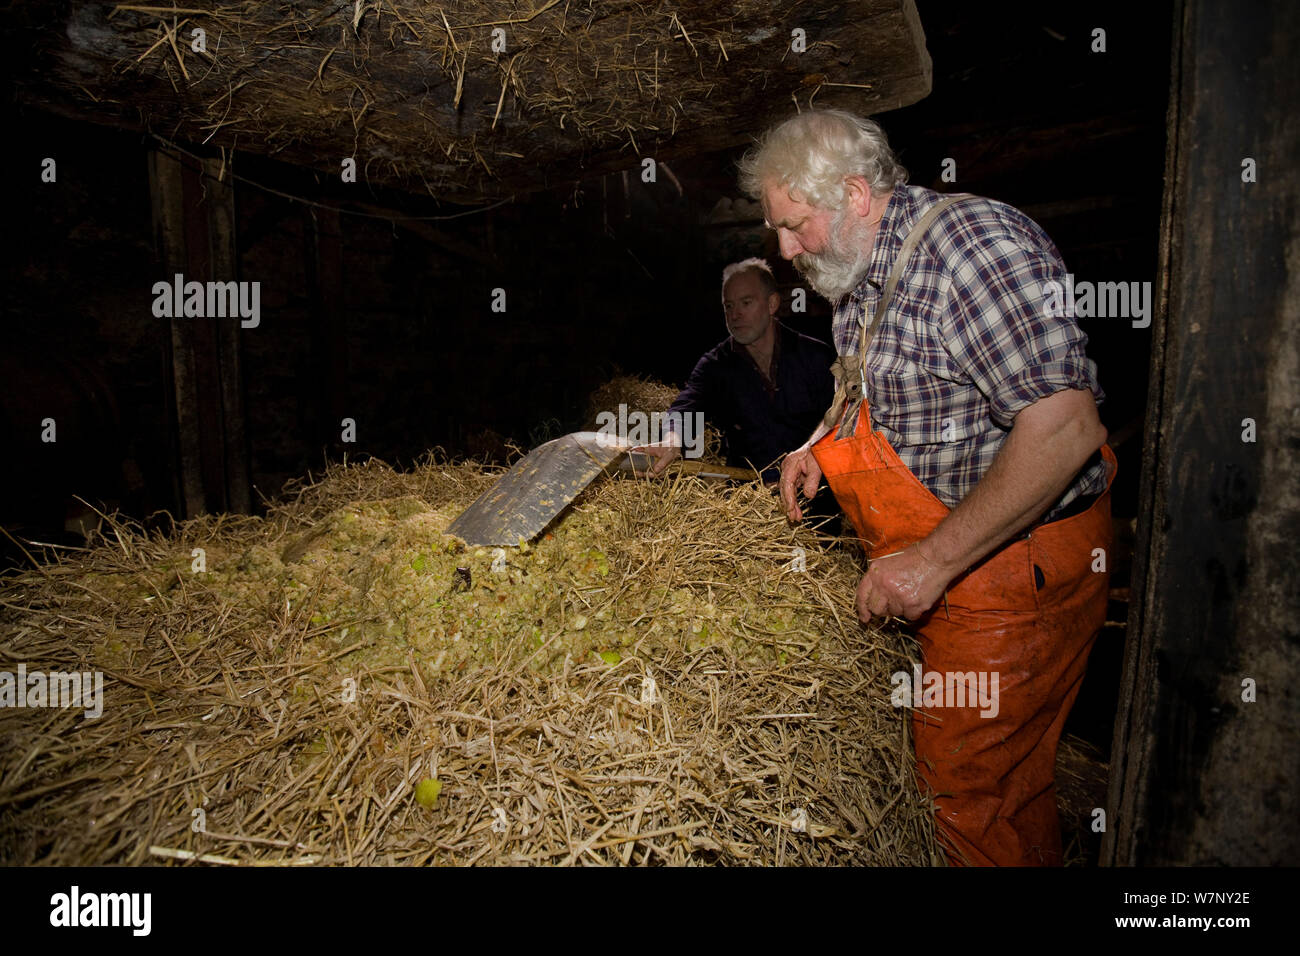 Cider maker Ron Barter treating hay as part of the production process. Devon, UK, November 2010. Stock Photo